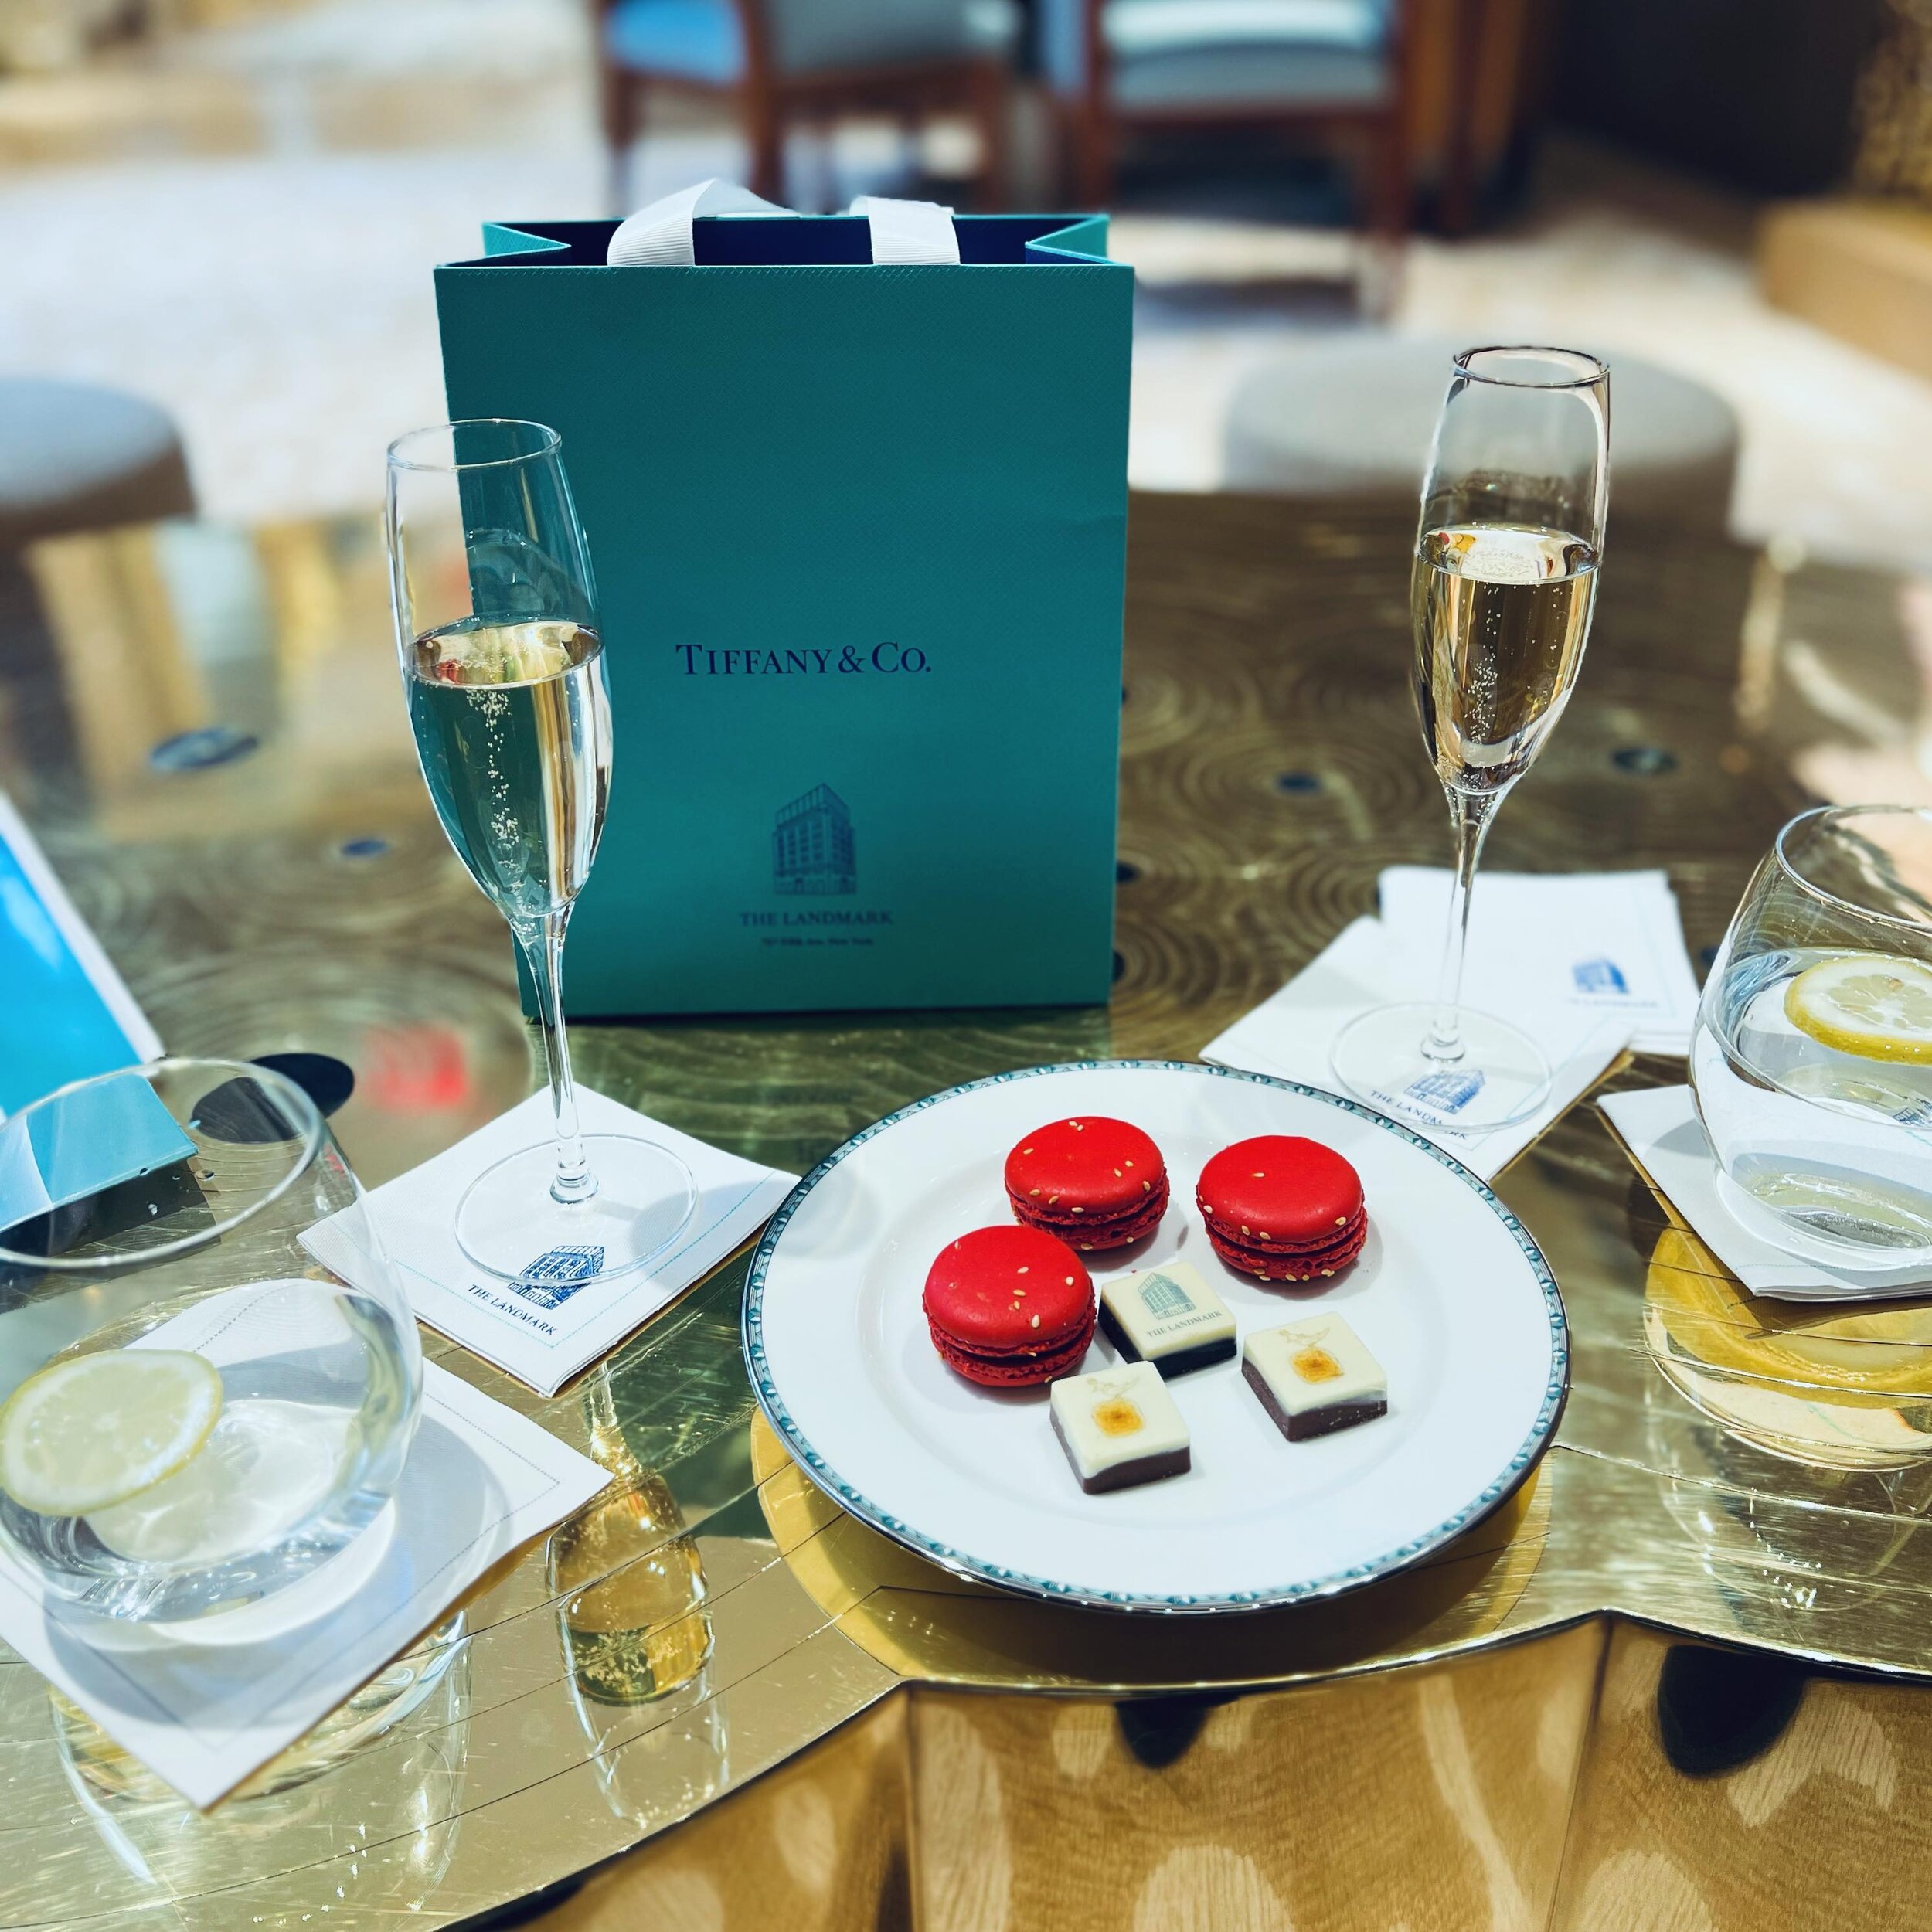 moments&hellip;
thank you Andrew for the attention to detail.
#shopping #holiday #moments #jewelry #champagne #chocolate #thelandmark #newyork #manhattan #5thavenue @tiffanyandco @ladureeus #bethanynewellofficial #itsallinthedetails